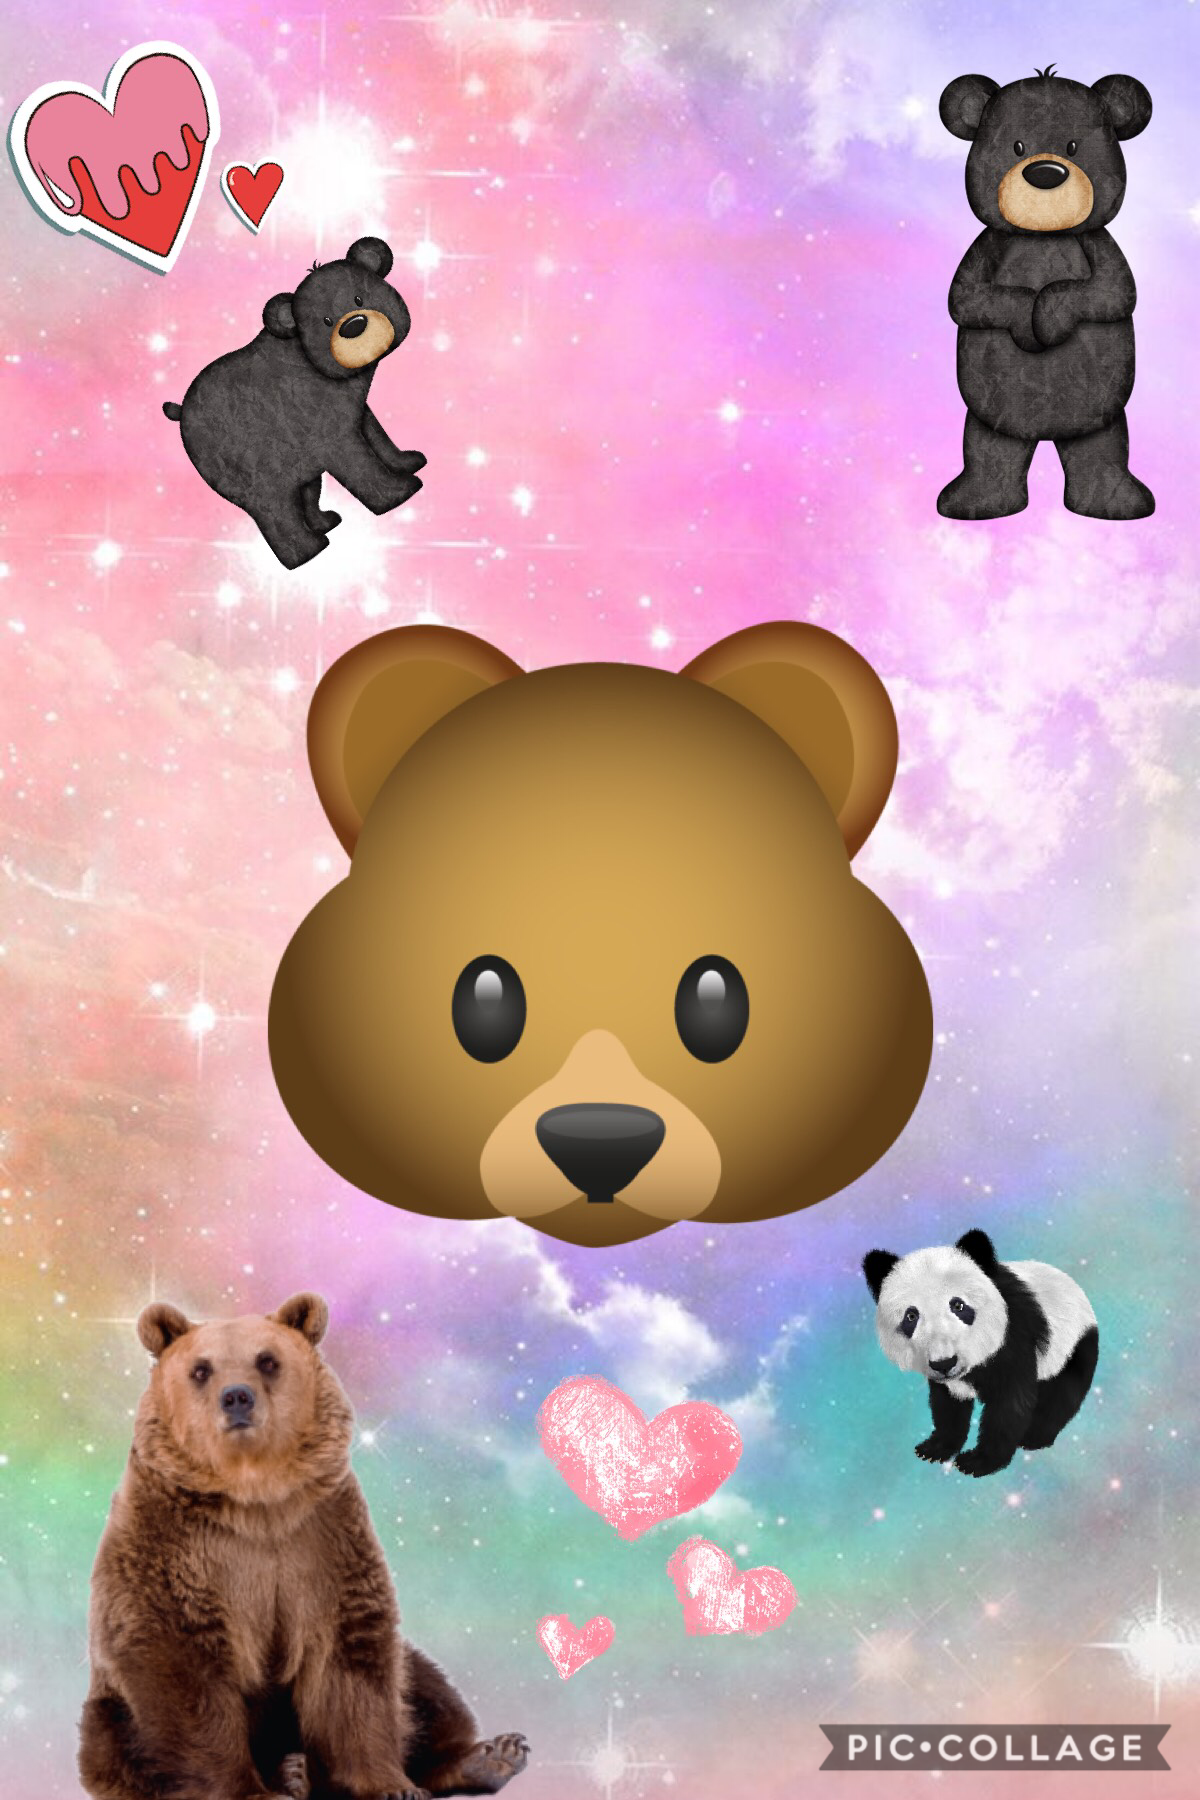 🐻🐻~Bear Theme~🐻🐻
Remix this collage into your own bear creation!
I will pick the winners on February 22 
1. Follow+5 likes
2. 10 likes 
Good Luck!